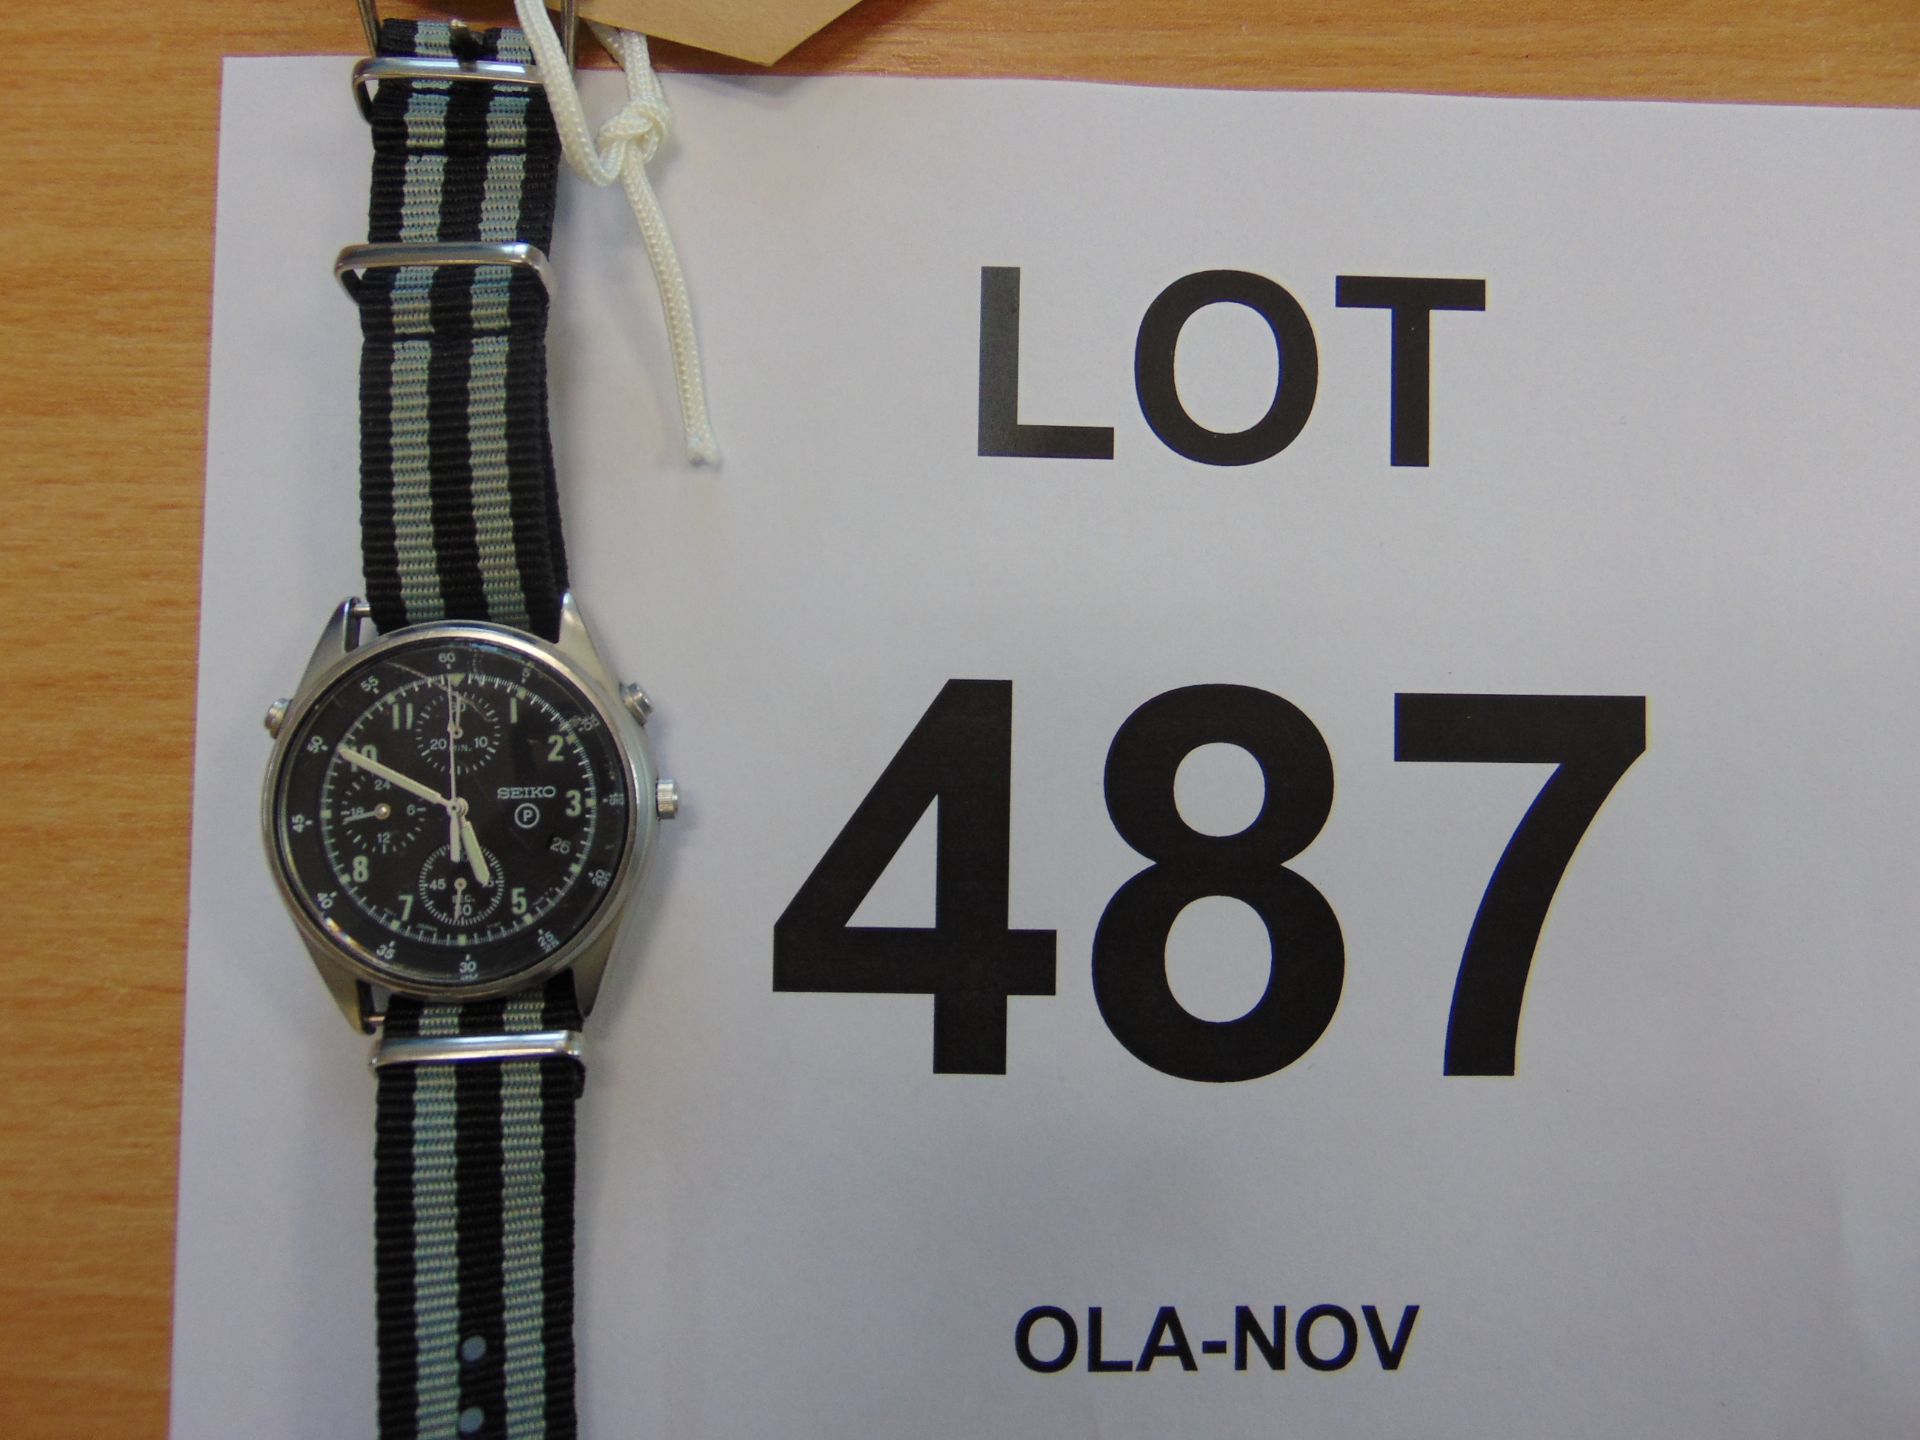 Seiko Gen 2 Pilots Chrono with date, RAF Tornado Force Issue Nato Marks, Date 1995 - Image 5 of 5